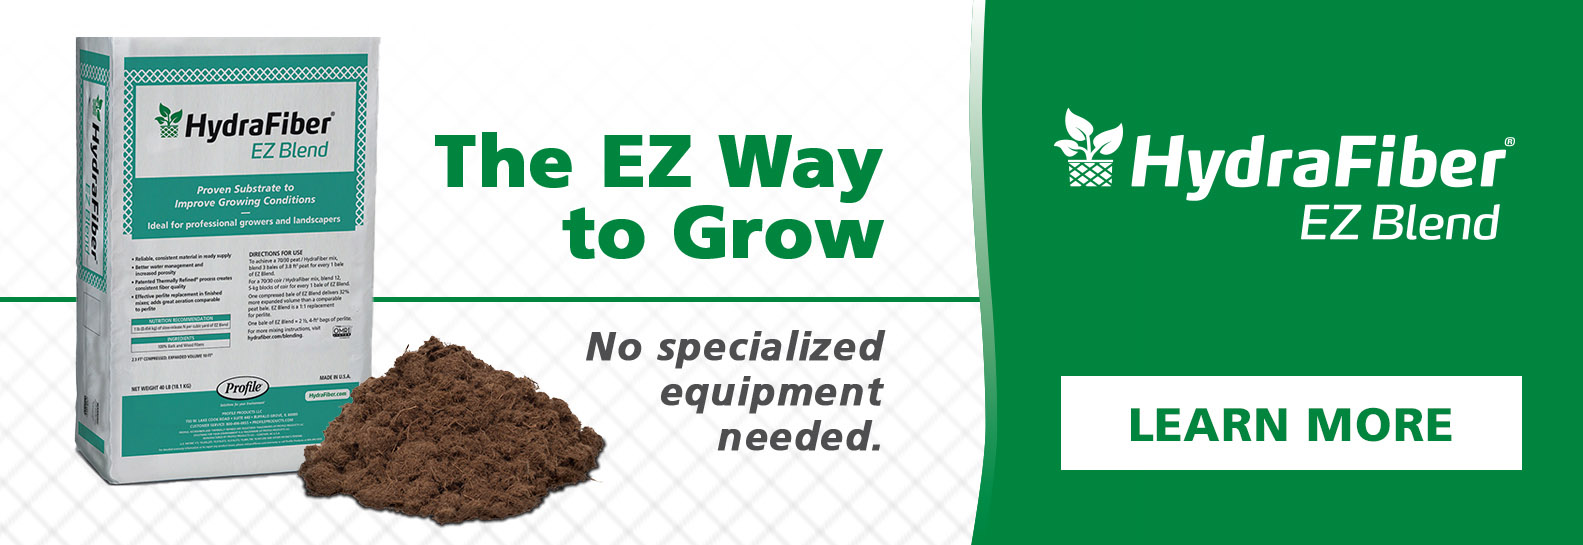 HydraFiber EZ Blend. The EZ Way To Grow. No Specialized Equipment needed.